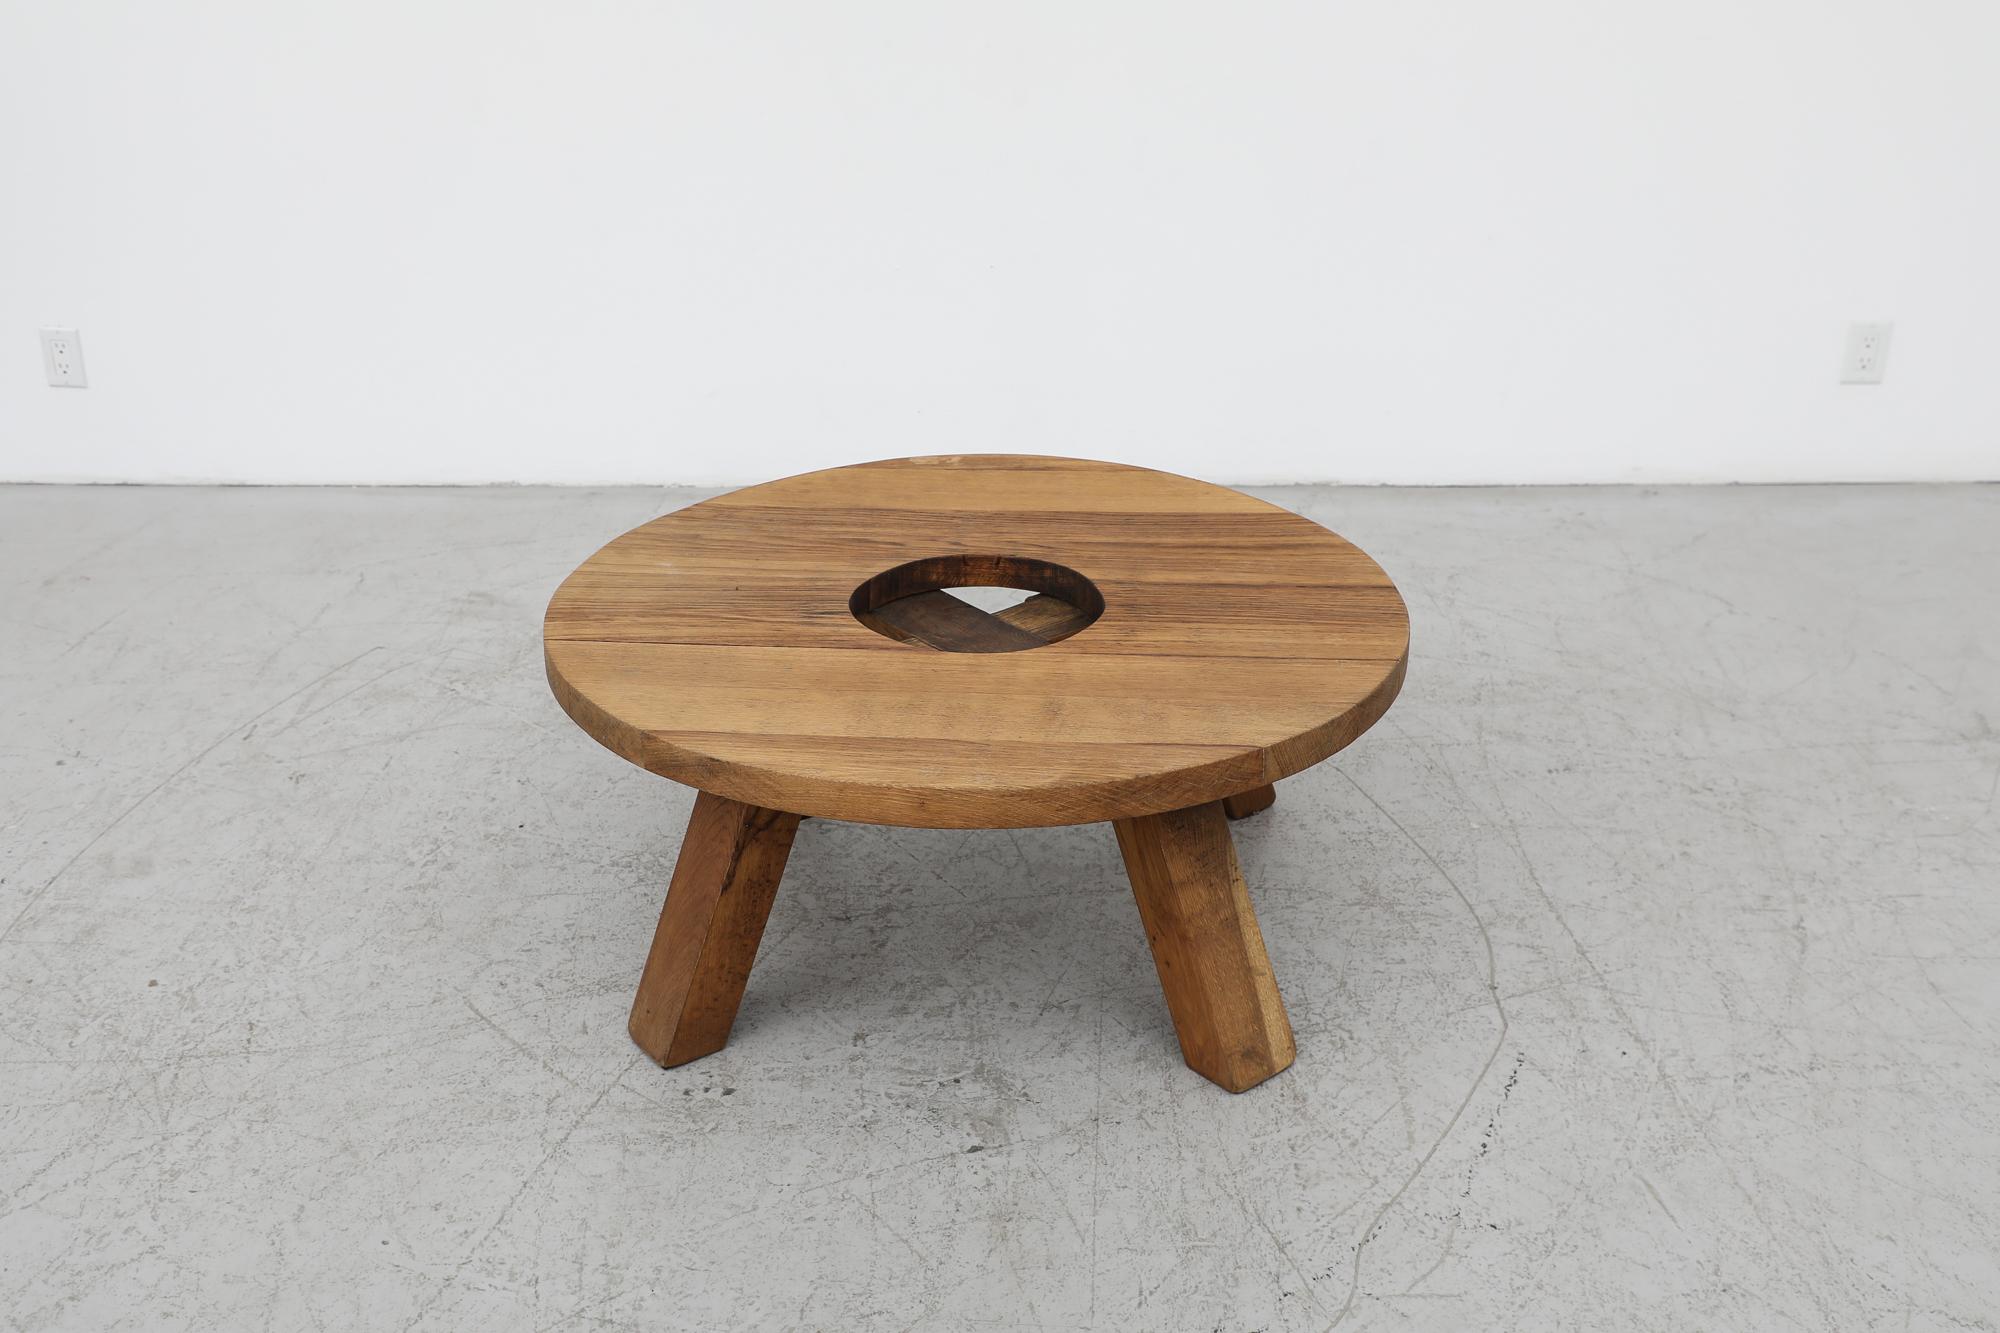 Dutch Mid-Century Pierre Chapo Inspired Brutalist Coffee Table For Sale